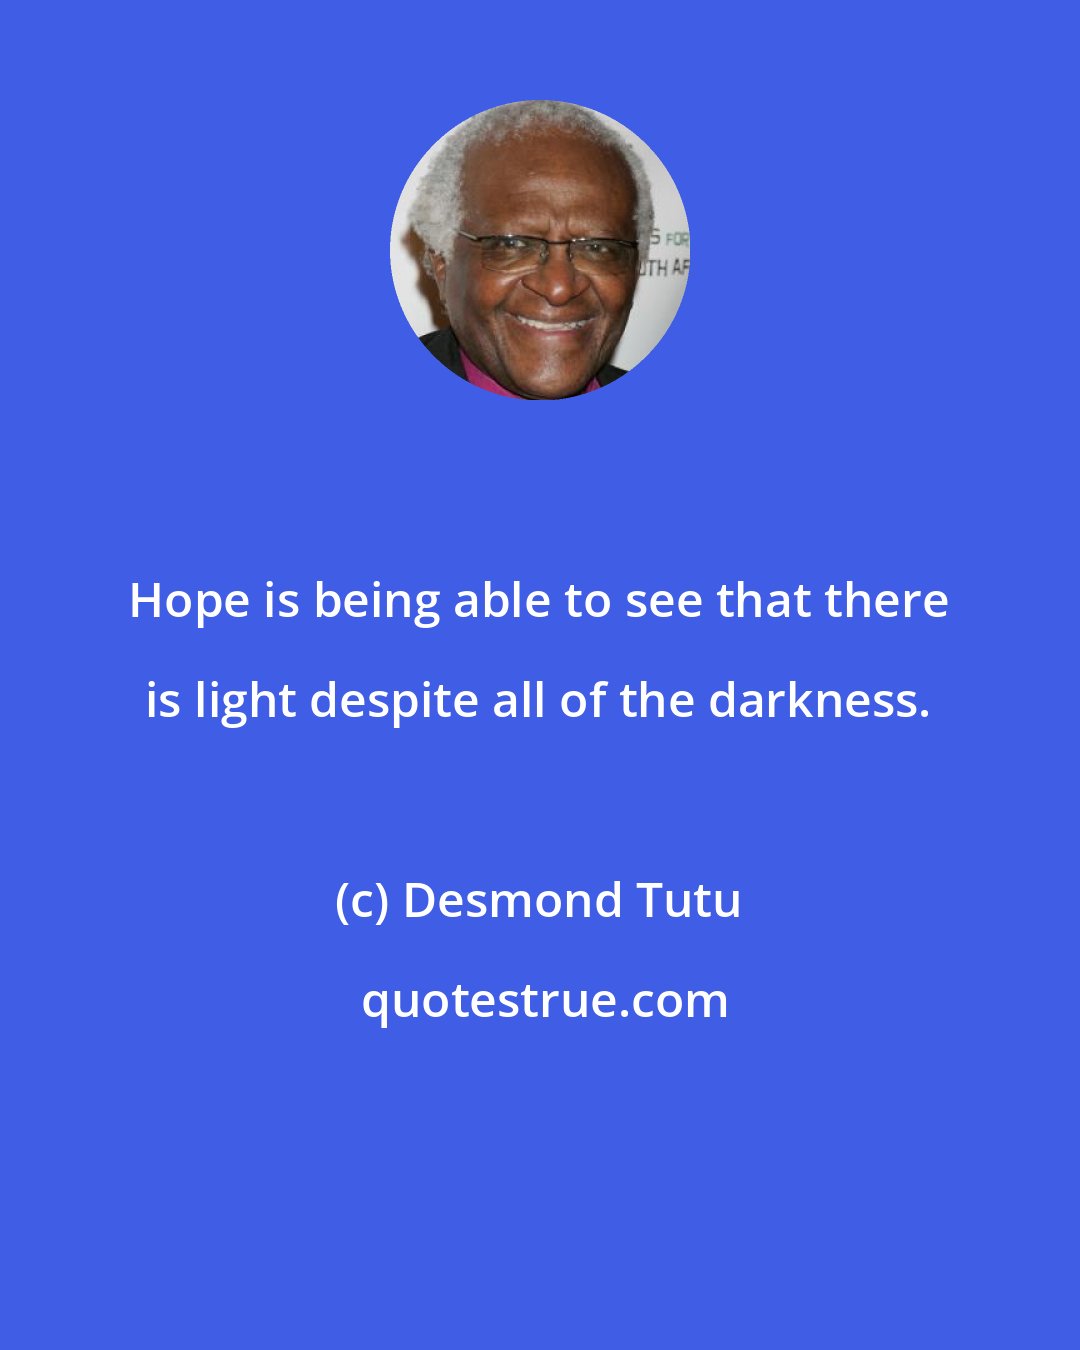 Desmond Tutu: Hope is being able to see that there is light despite all of the darkness.